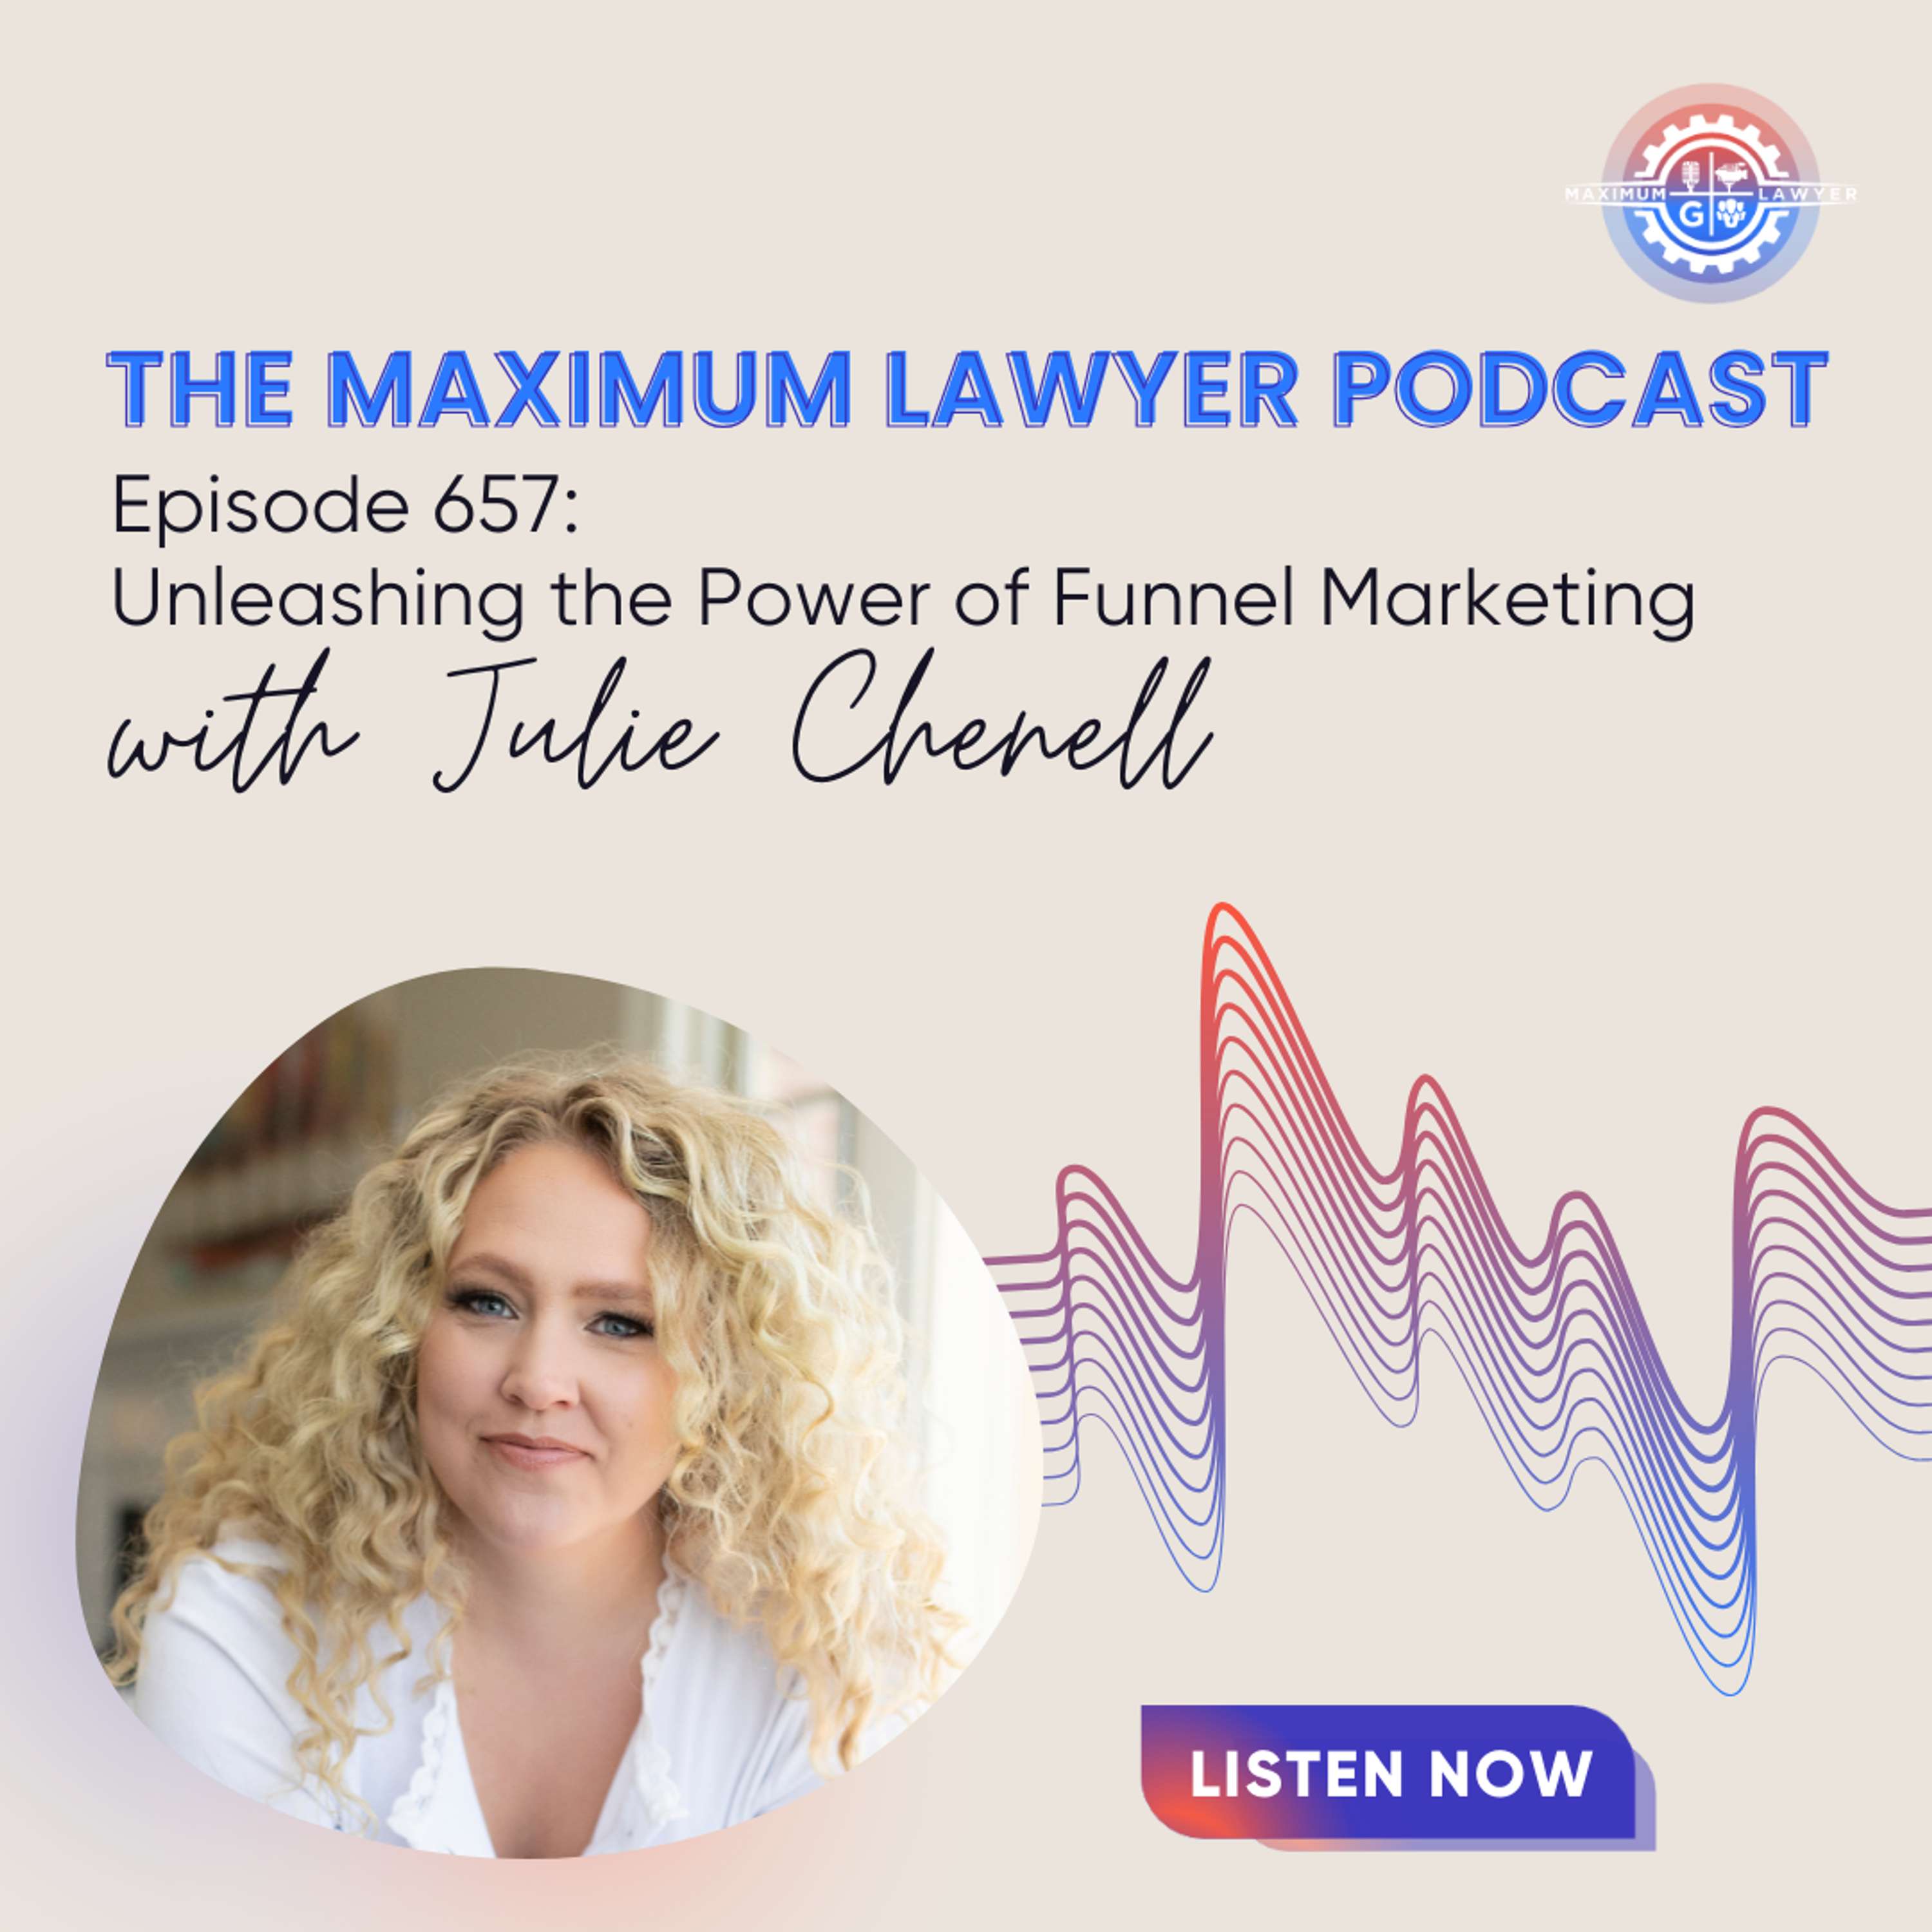 Unleashing the Power of Funnel Marketing with Julie Chenell